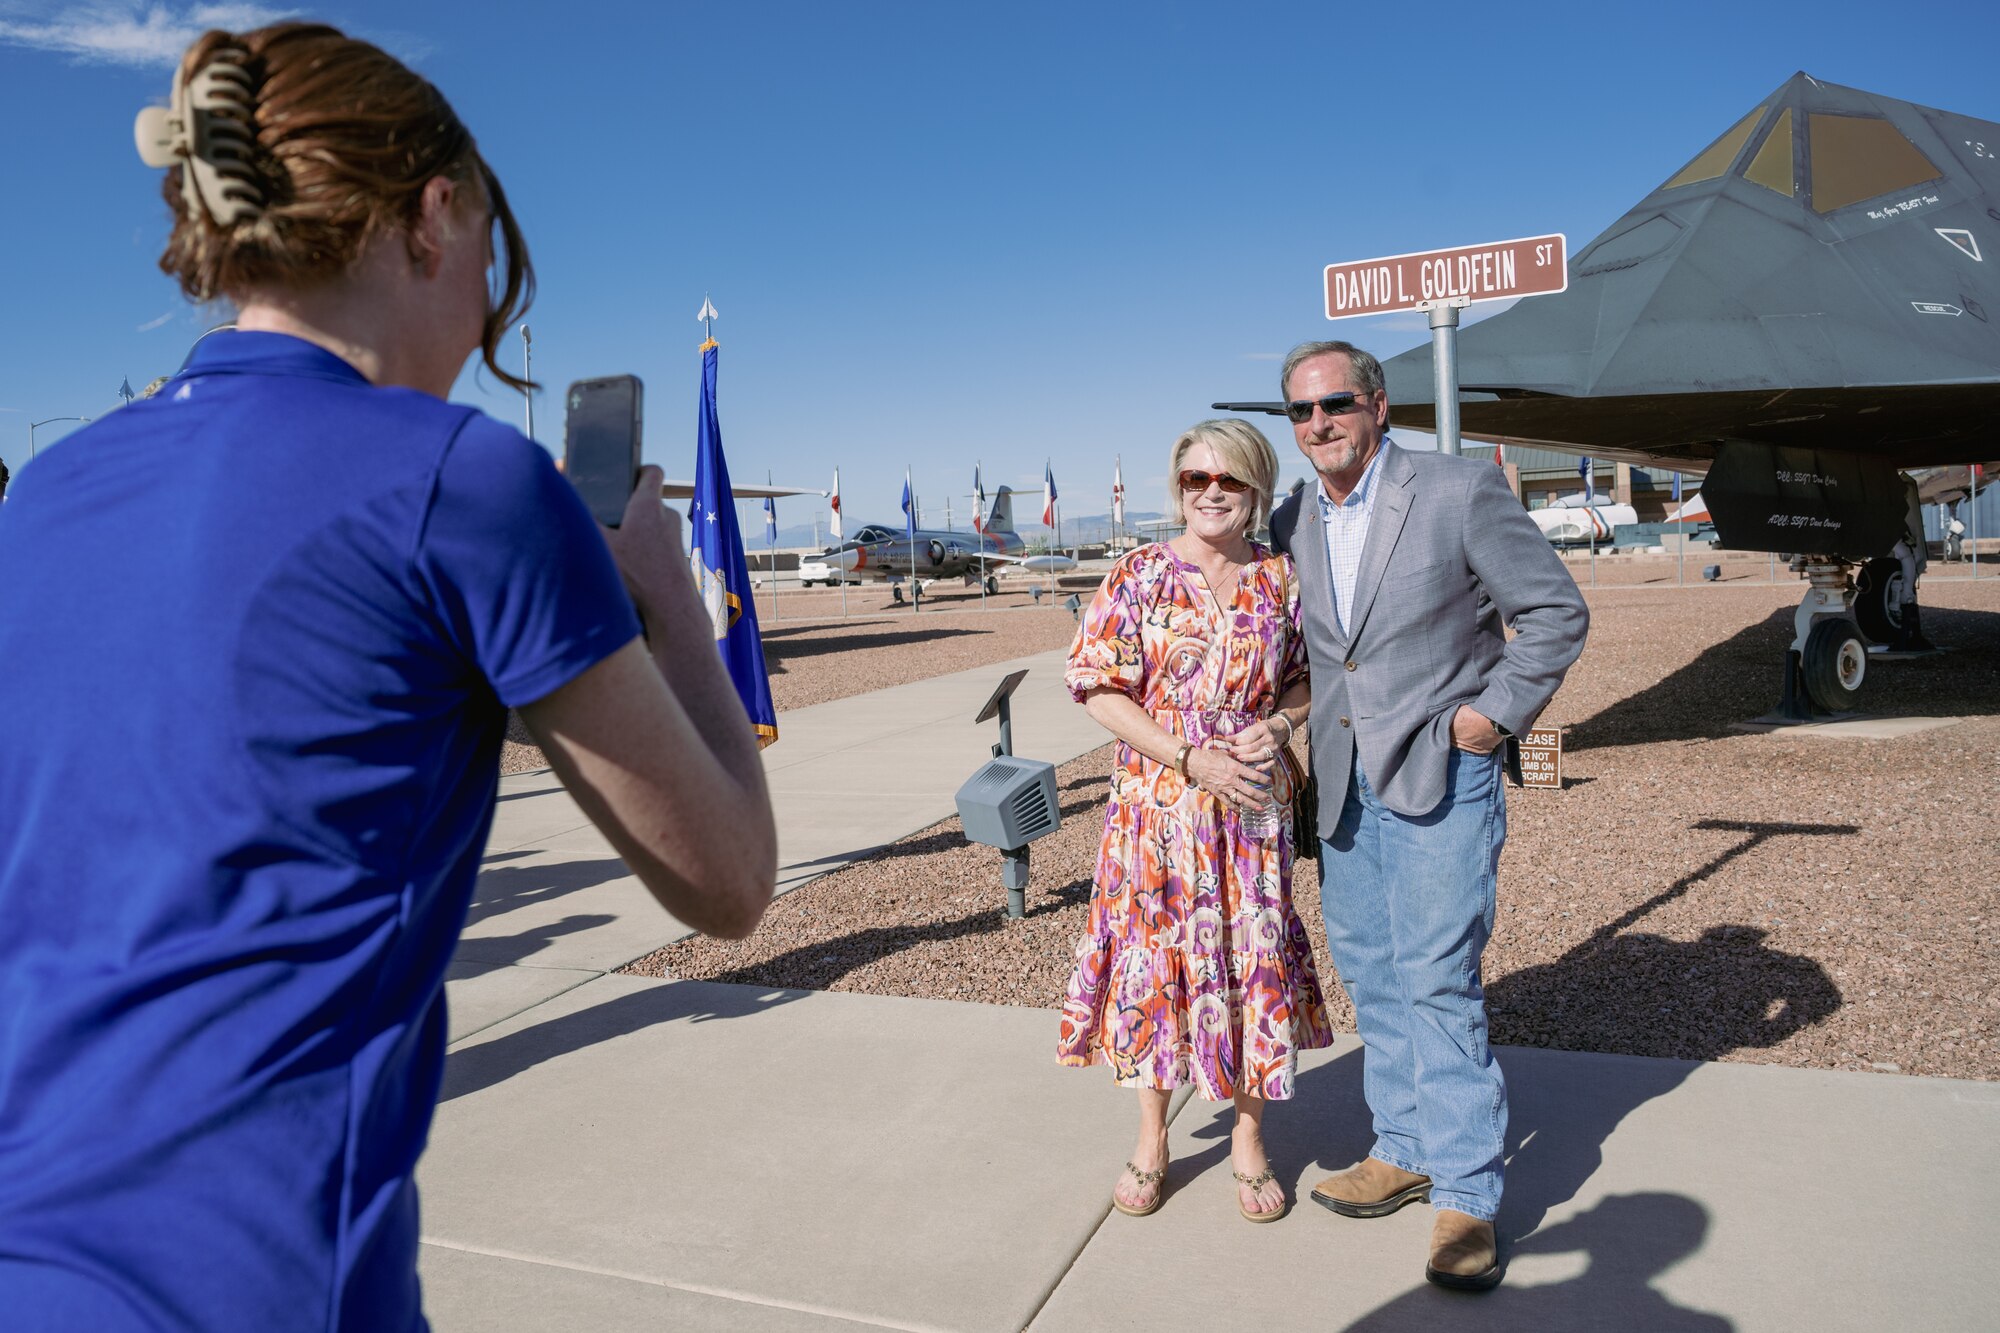 Retired U.S. Air Force Gen. David L. Goldfein, right, and his wife, Dawn, pose for a photo during a street renaming ceremony at Holloman Air Force Base, New Mexico, Sept. 22, 2023. A street here was renamed to honor the 21st Chief of Staff of the U.S. Air Force and previous Holloman commander, U.S. Air Force Gen. David L. Goldfein. (U.S. Air Force photo by Senior Airman Antonio Salfran)